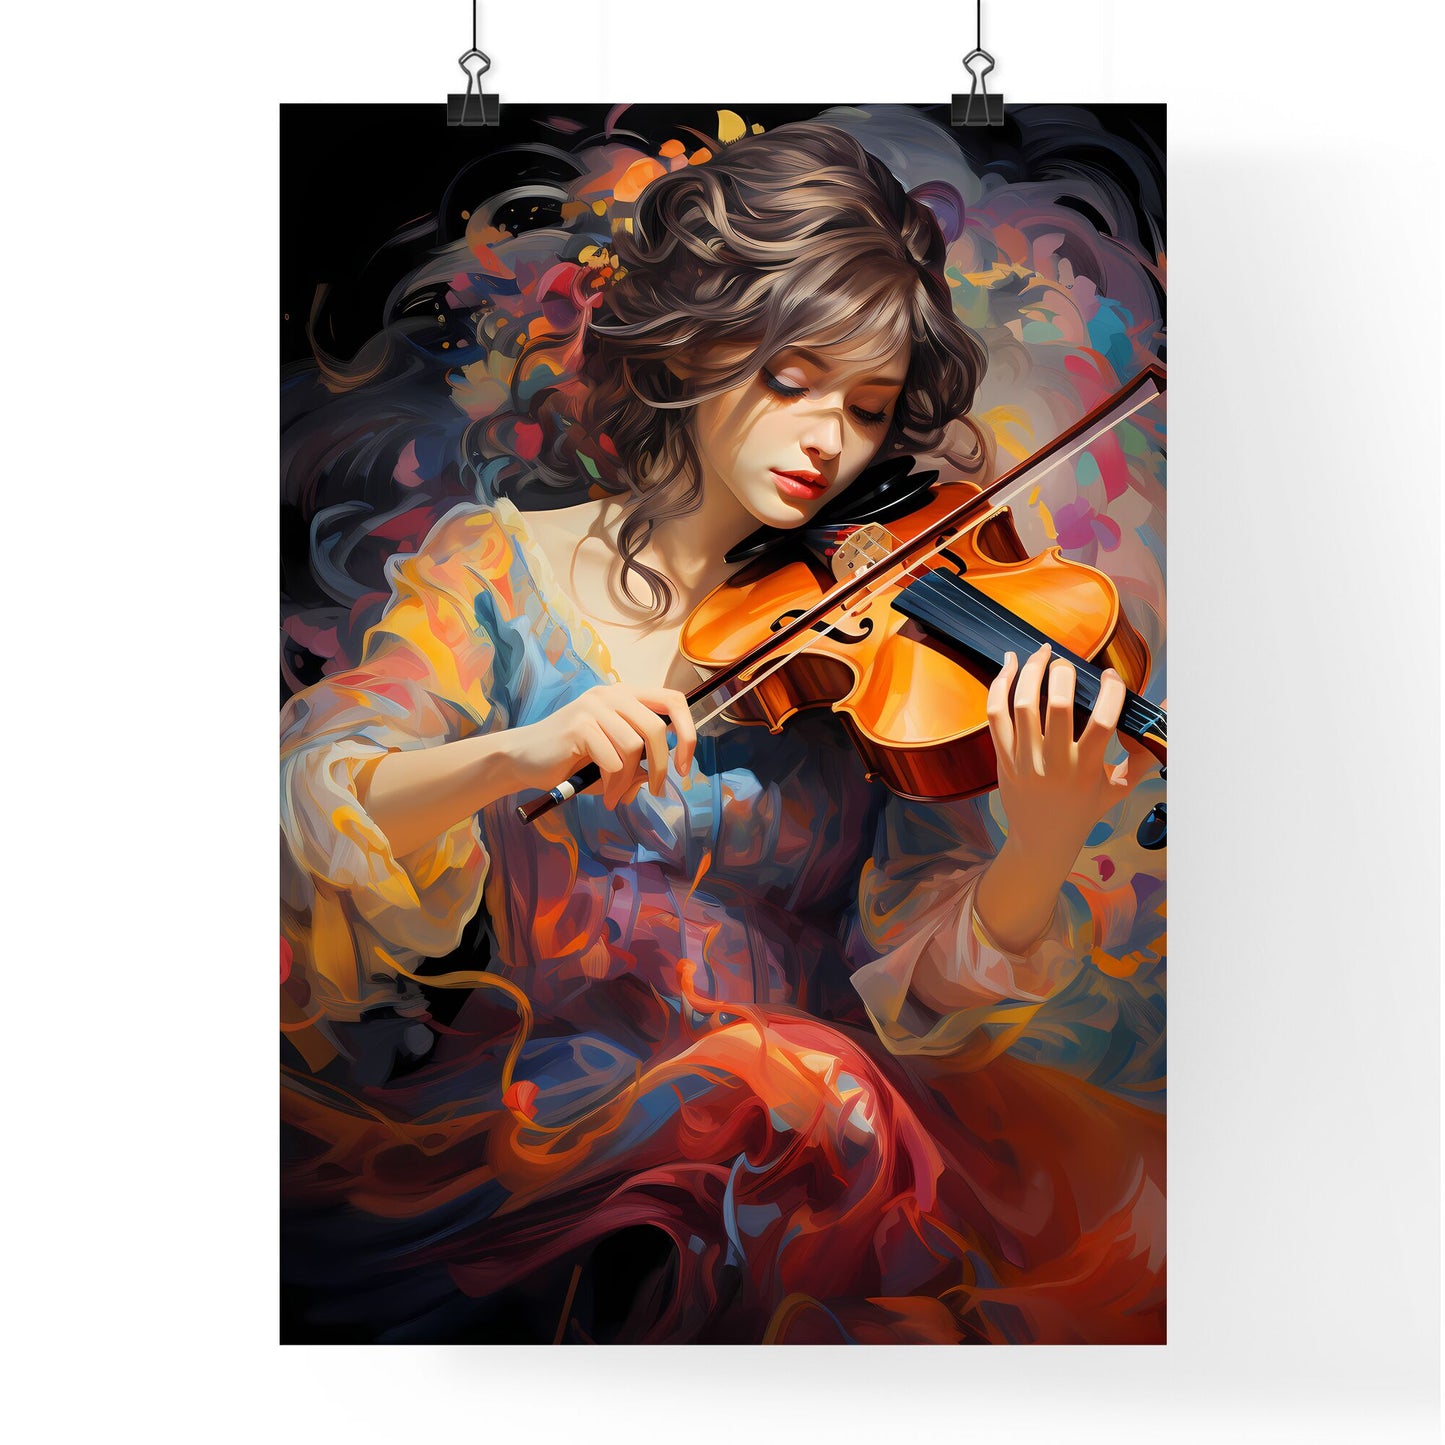 The Girl With A Violin And A Forfeit The Double - A Woman Playing A Violin Default Title